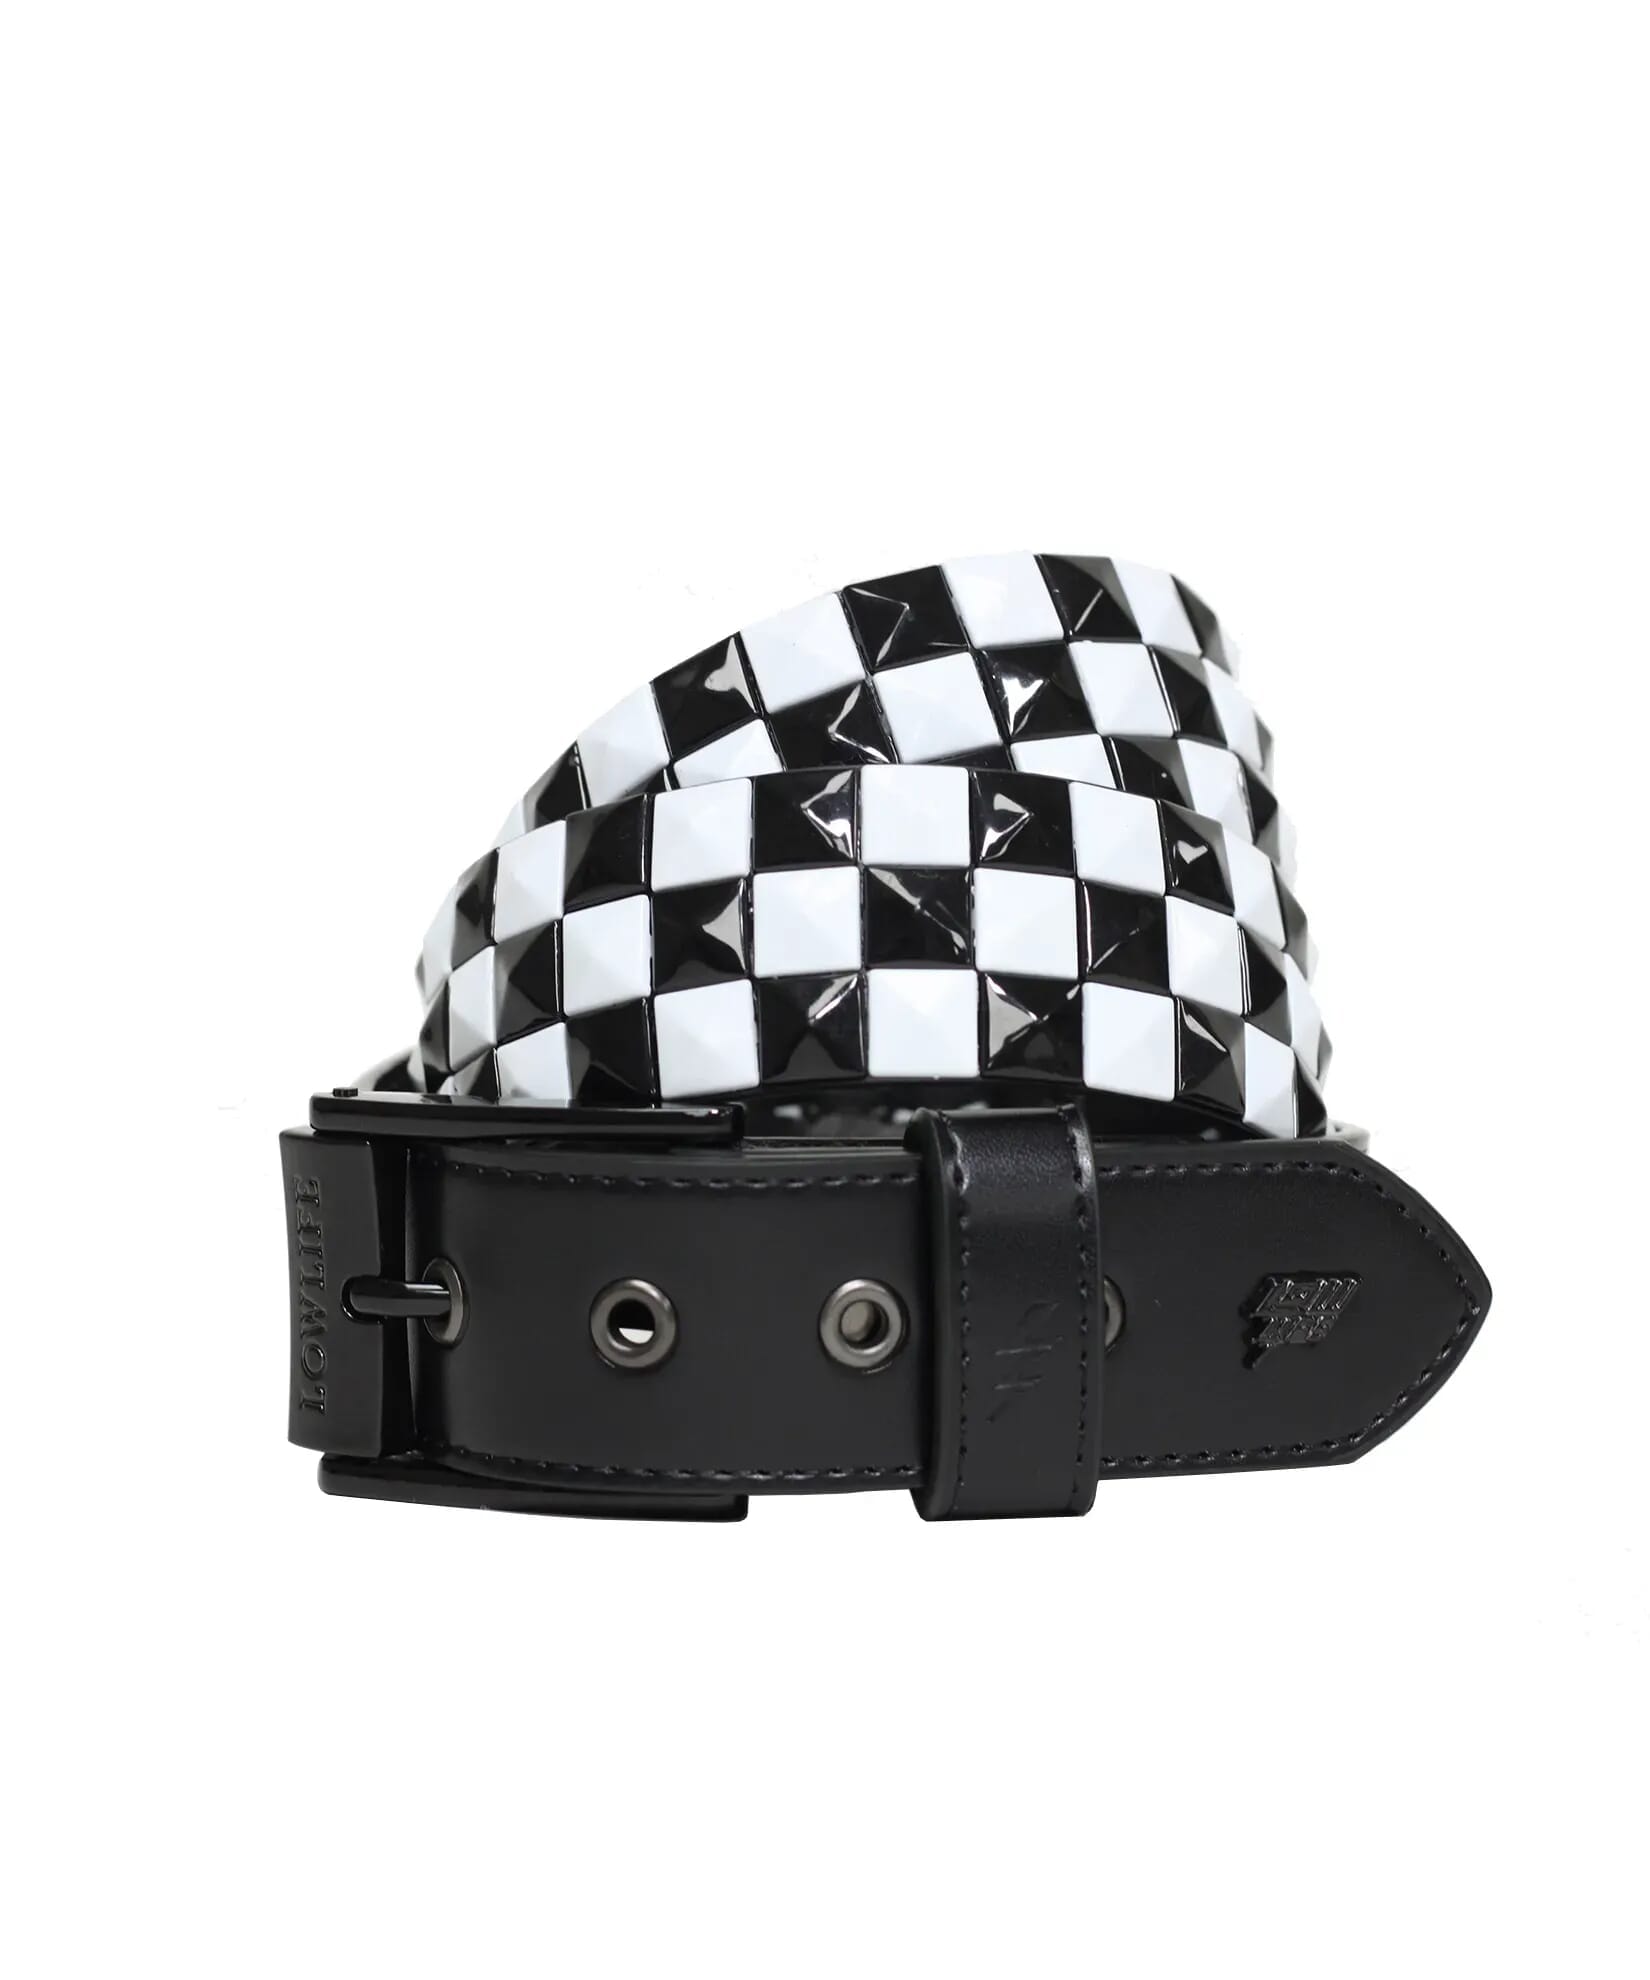 Triple Studded Leather Belt Black and White - Lowlife